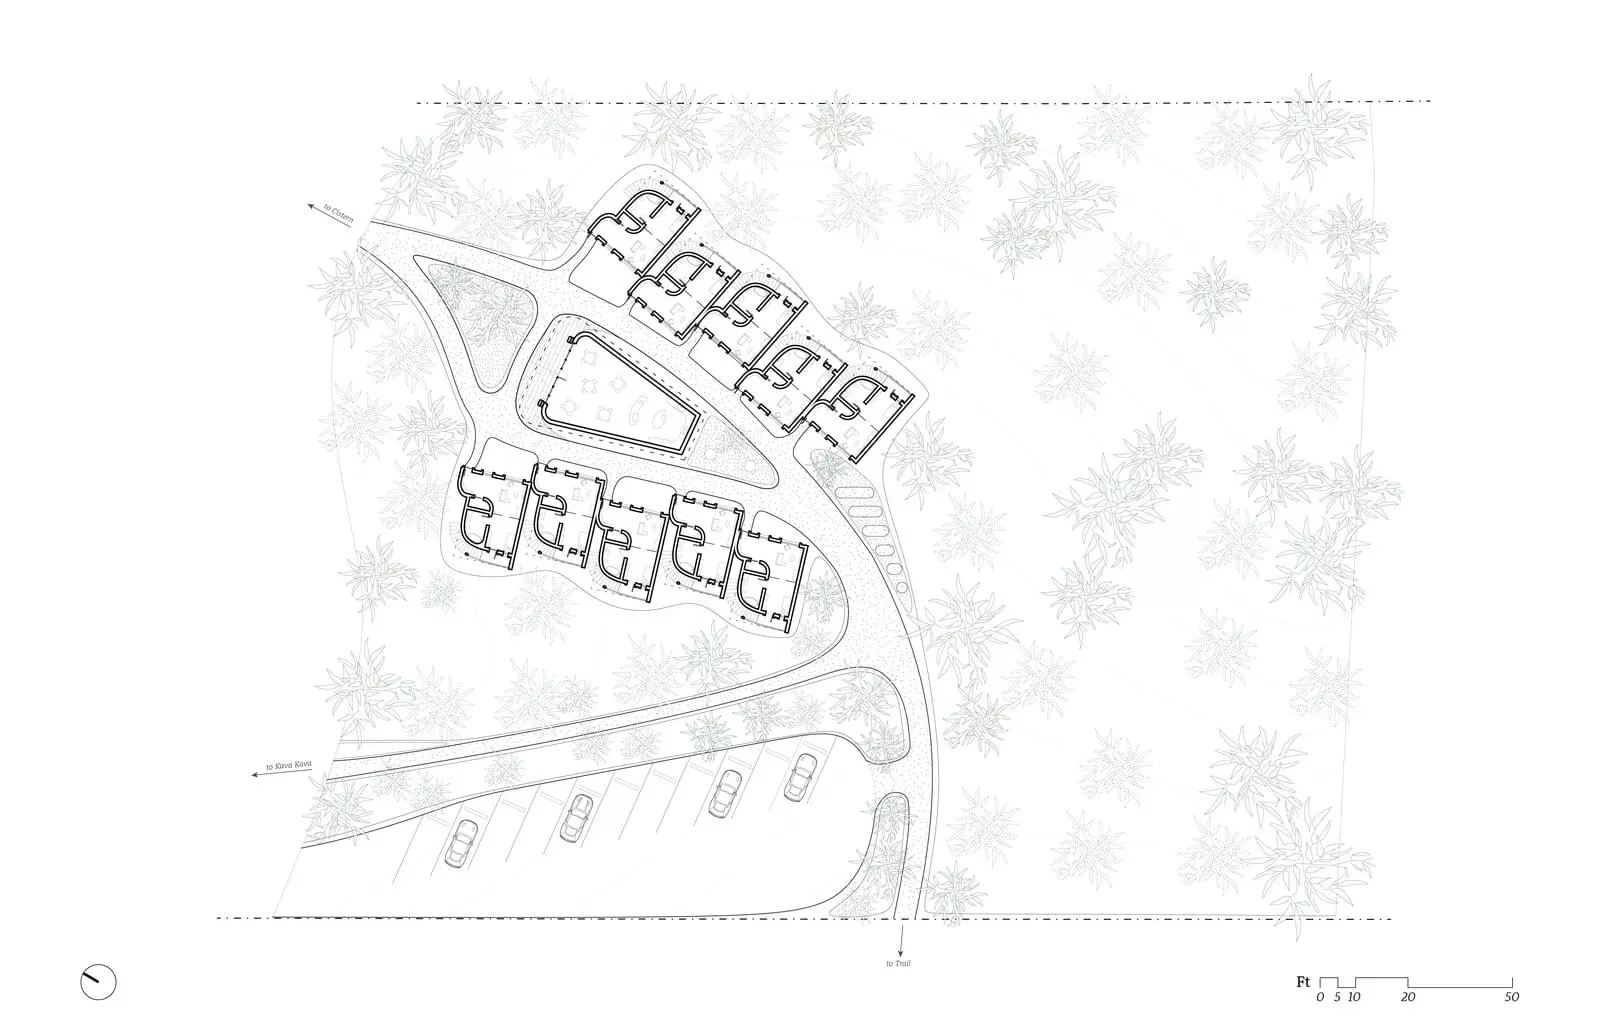 PP web student images_Chopin Gaschen_13 Hide   Plan of the Living Area